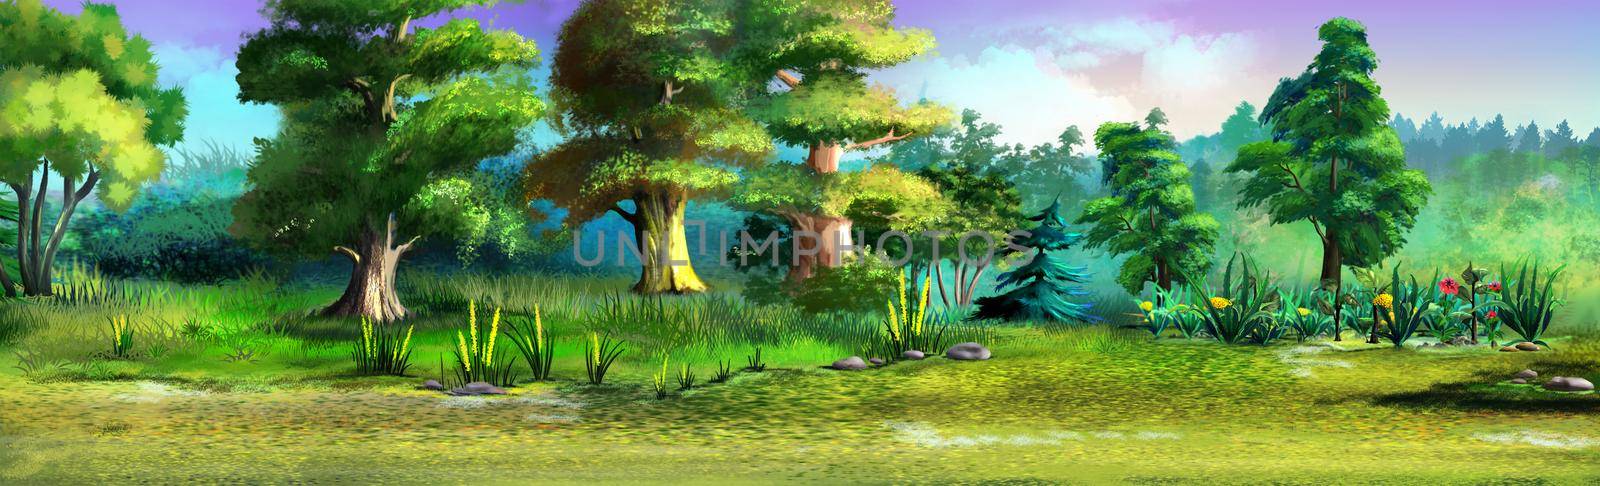 Forest edge on a summer day illustration by Multipedia